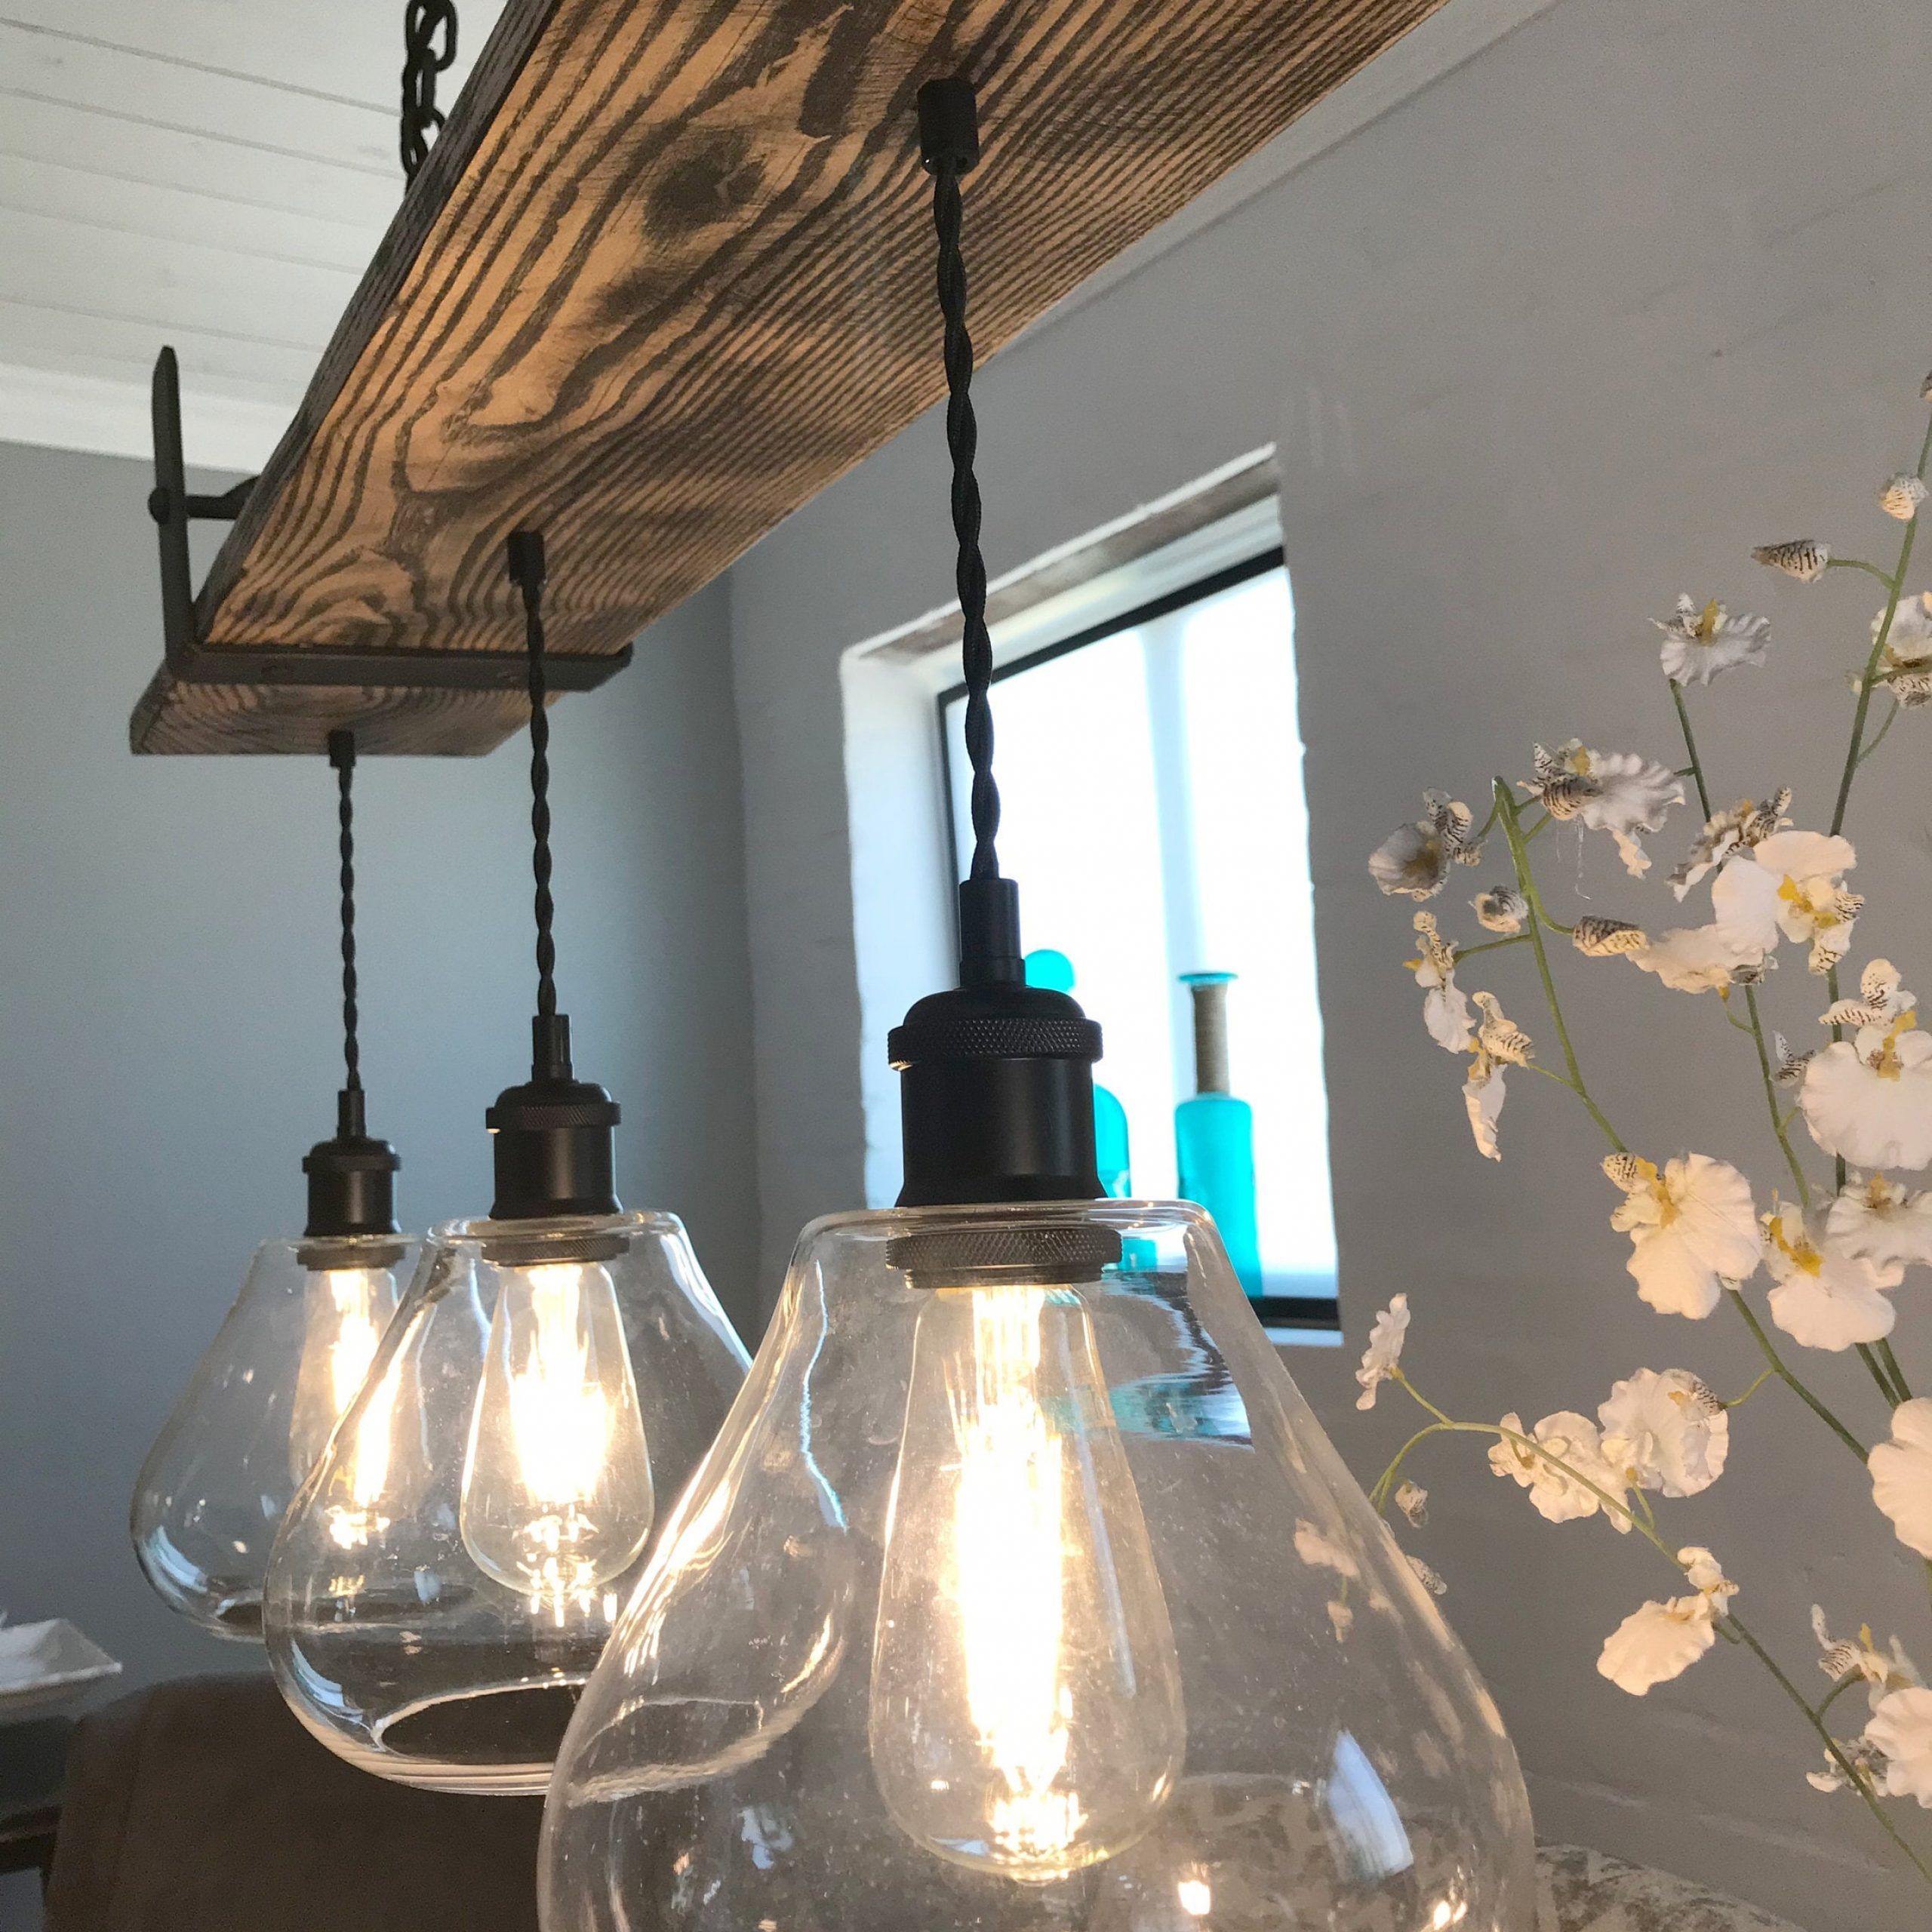 Aged Oak Wood 4 Hanging Light Chandelier With Barnwood Beam – Etsy Throughout Distressed Oak Lantern Chandeliers (View 10 of 15)